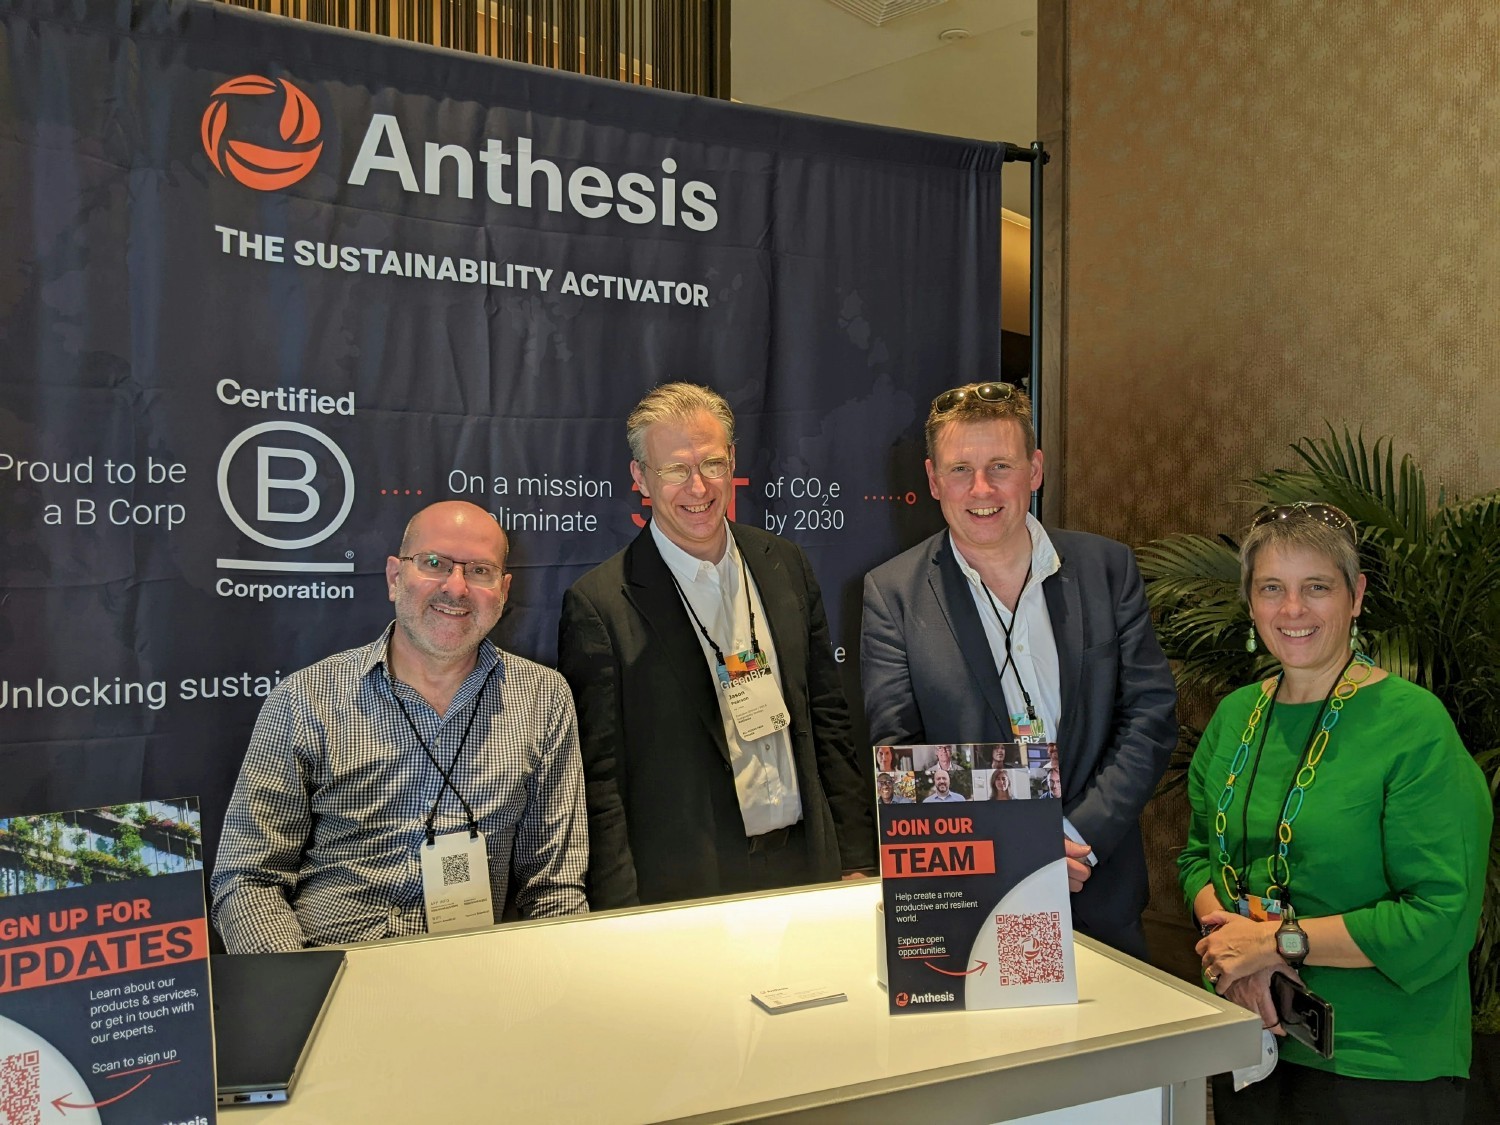 Representing Anthesis at a sustainability conference